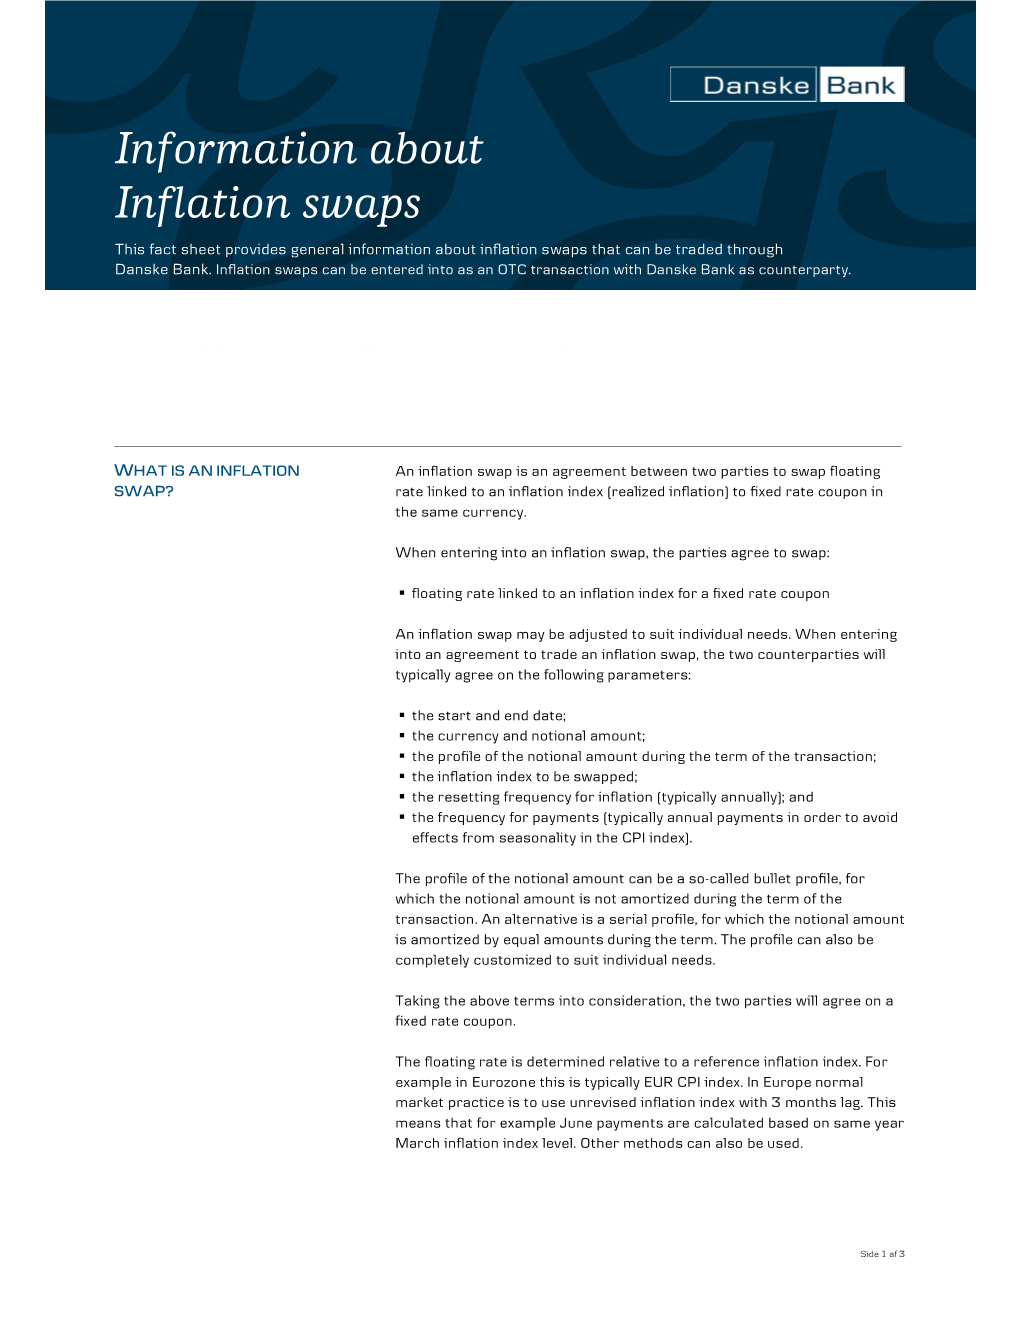 Information About Inflation Swaps That Can Be Traded Through Danske Bank